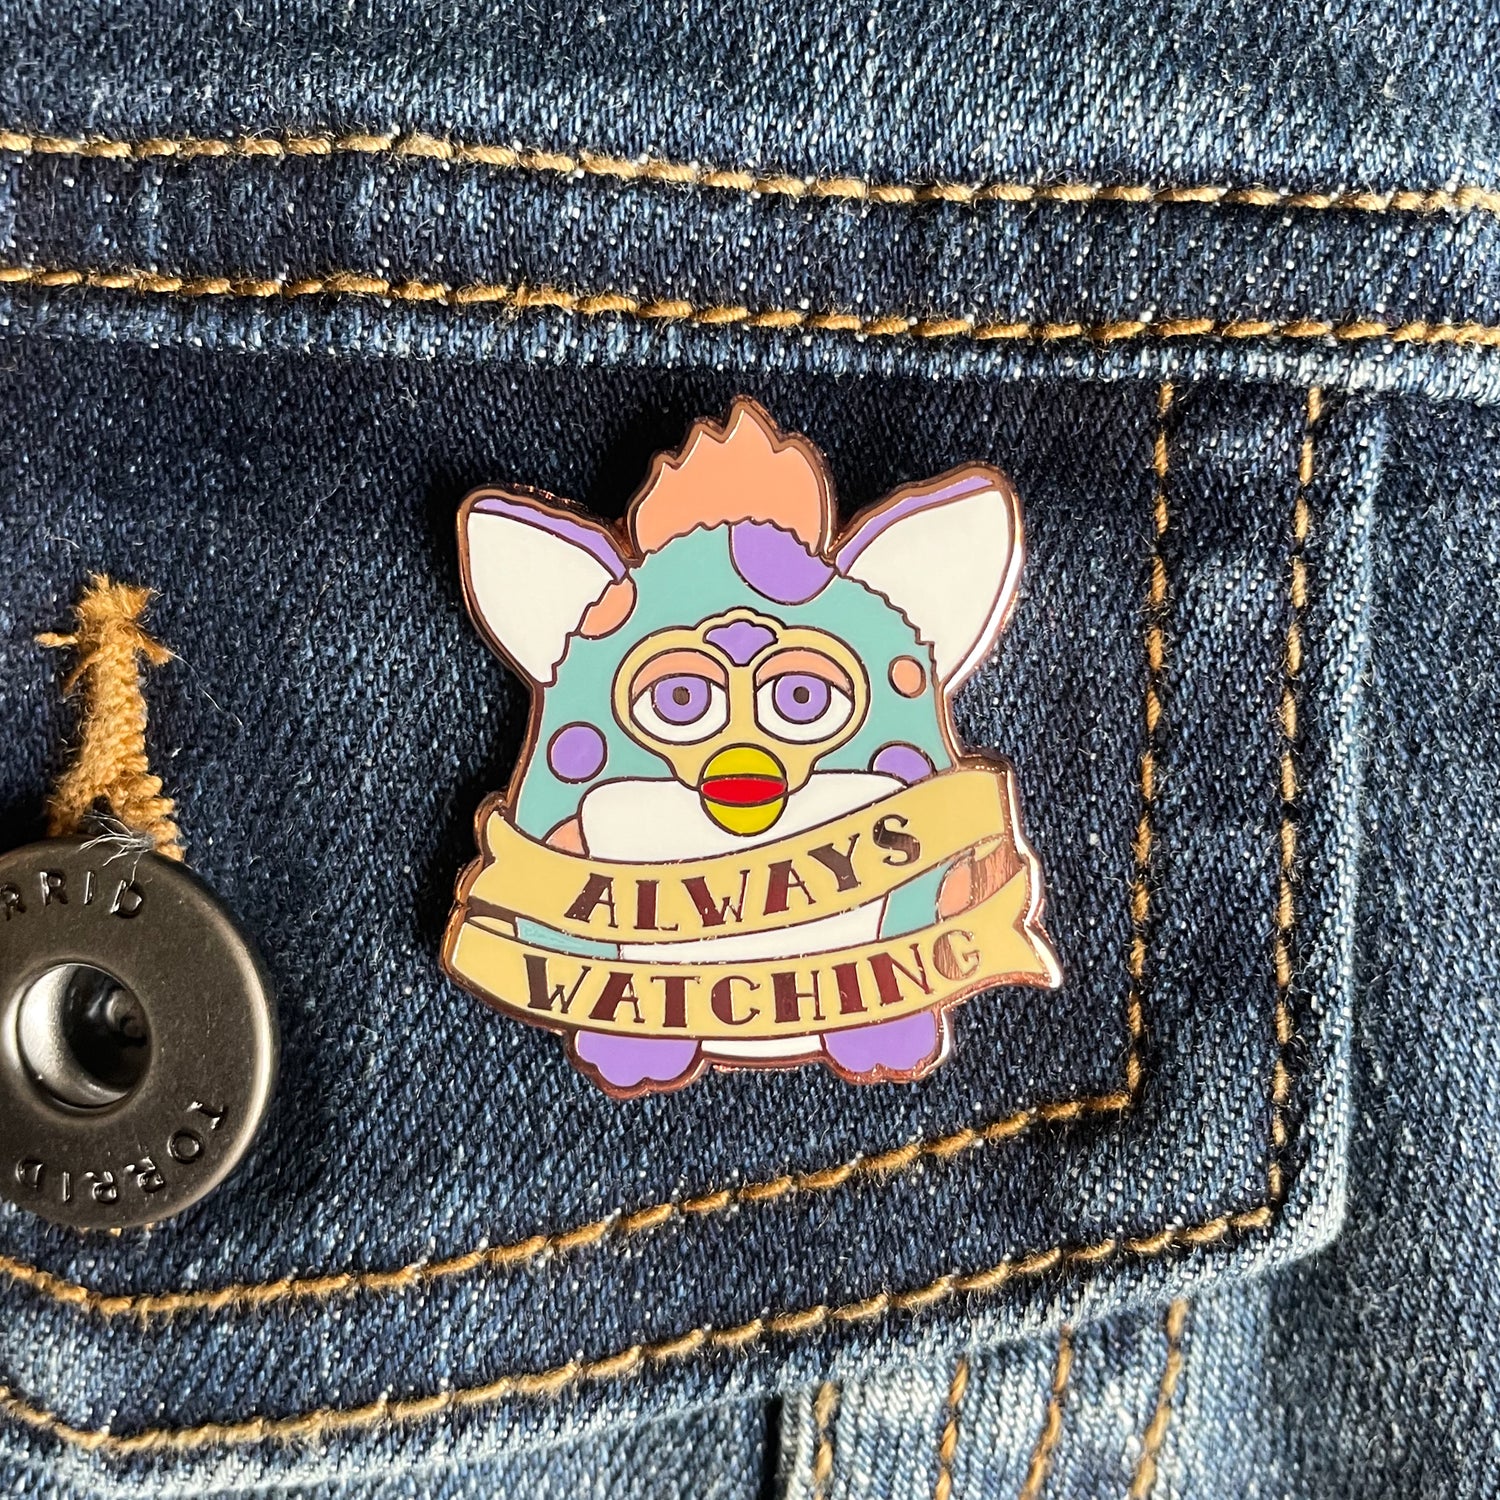 An enamel pin in the shape of a Furby with a tattoo style banner around its body that says "Always Watching". The Furby is light blue with peach and lavender spots. The pin is on a denim pocket.